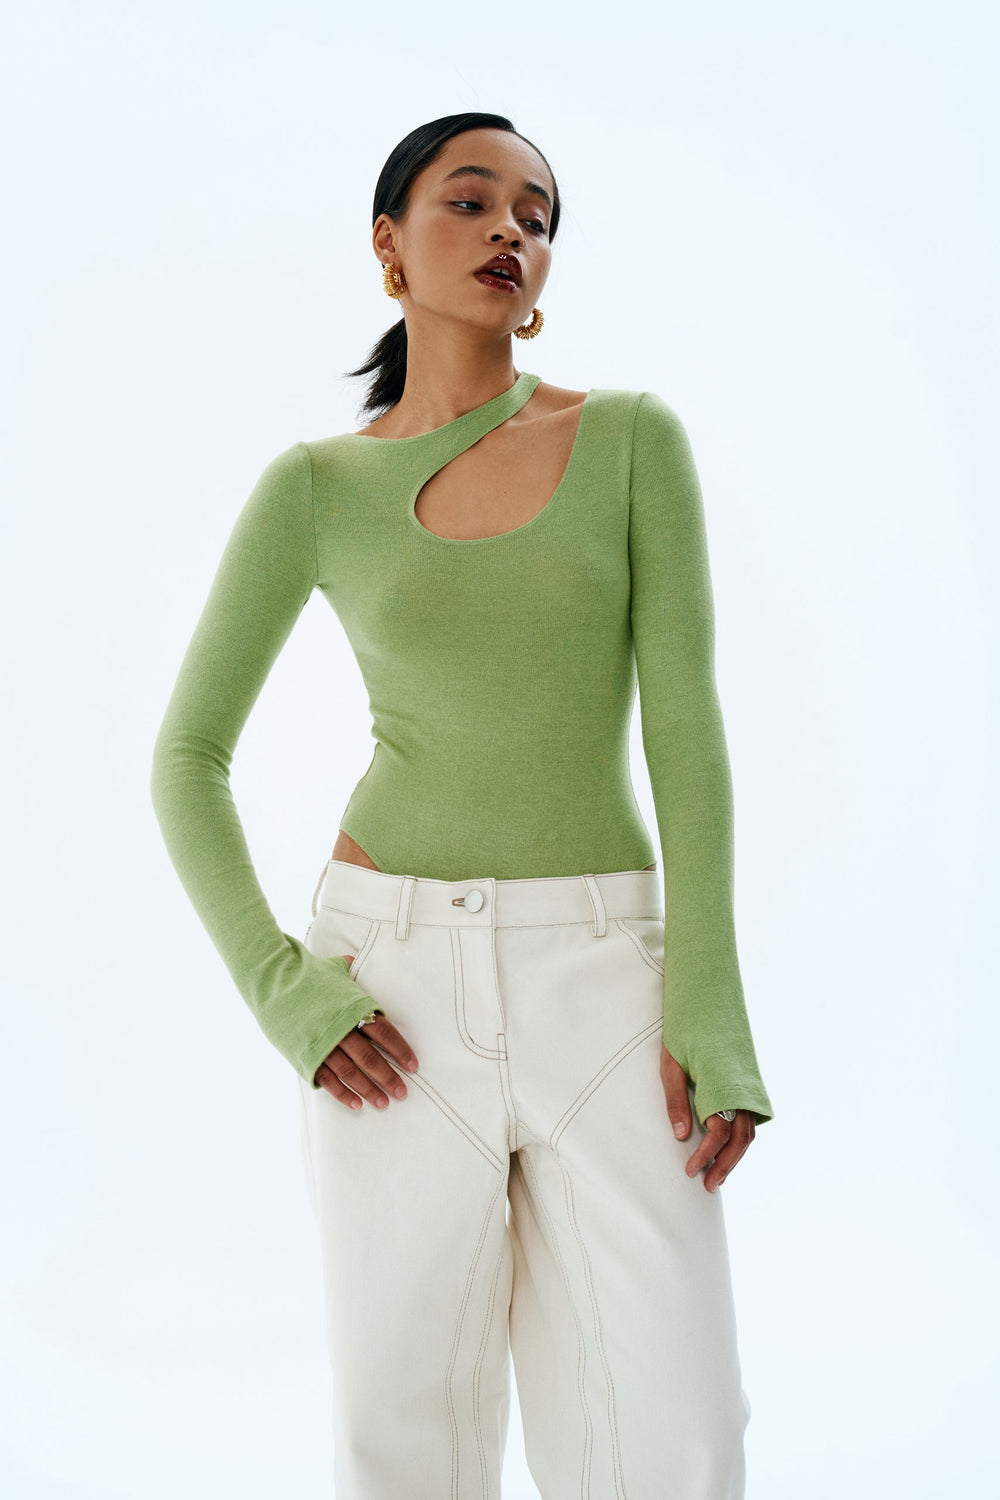 Woman wearing the Miley Bodysuit sewing pattern from Vikisews on The Fold Line. A bodysuit pattern made in sweater knits, rib knits, and ponte di roma fabrics, featuring a close-fit, asymmetric neckline with shaped cutout on the left shoulder, set-in slee